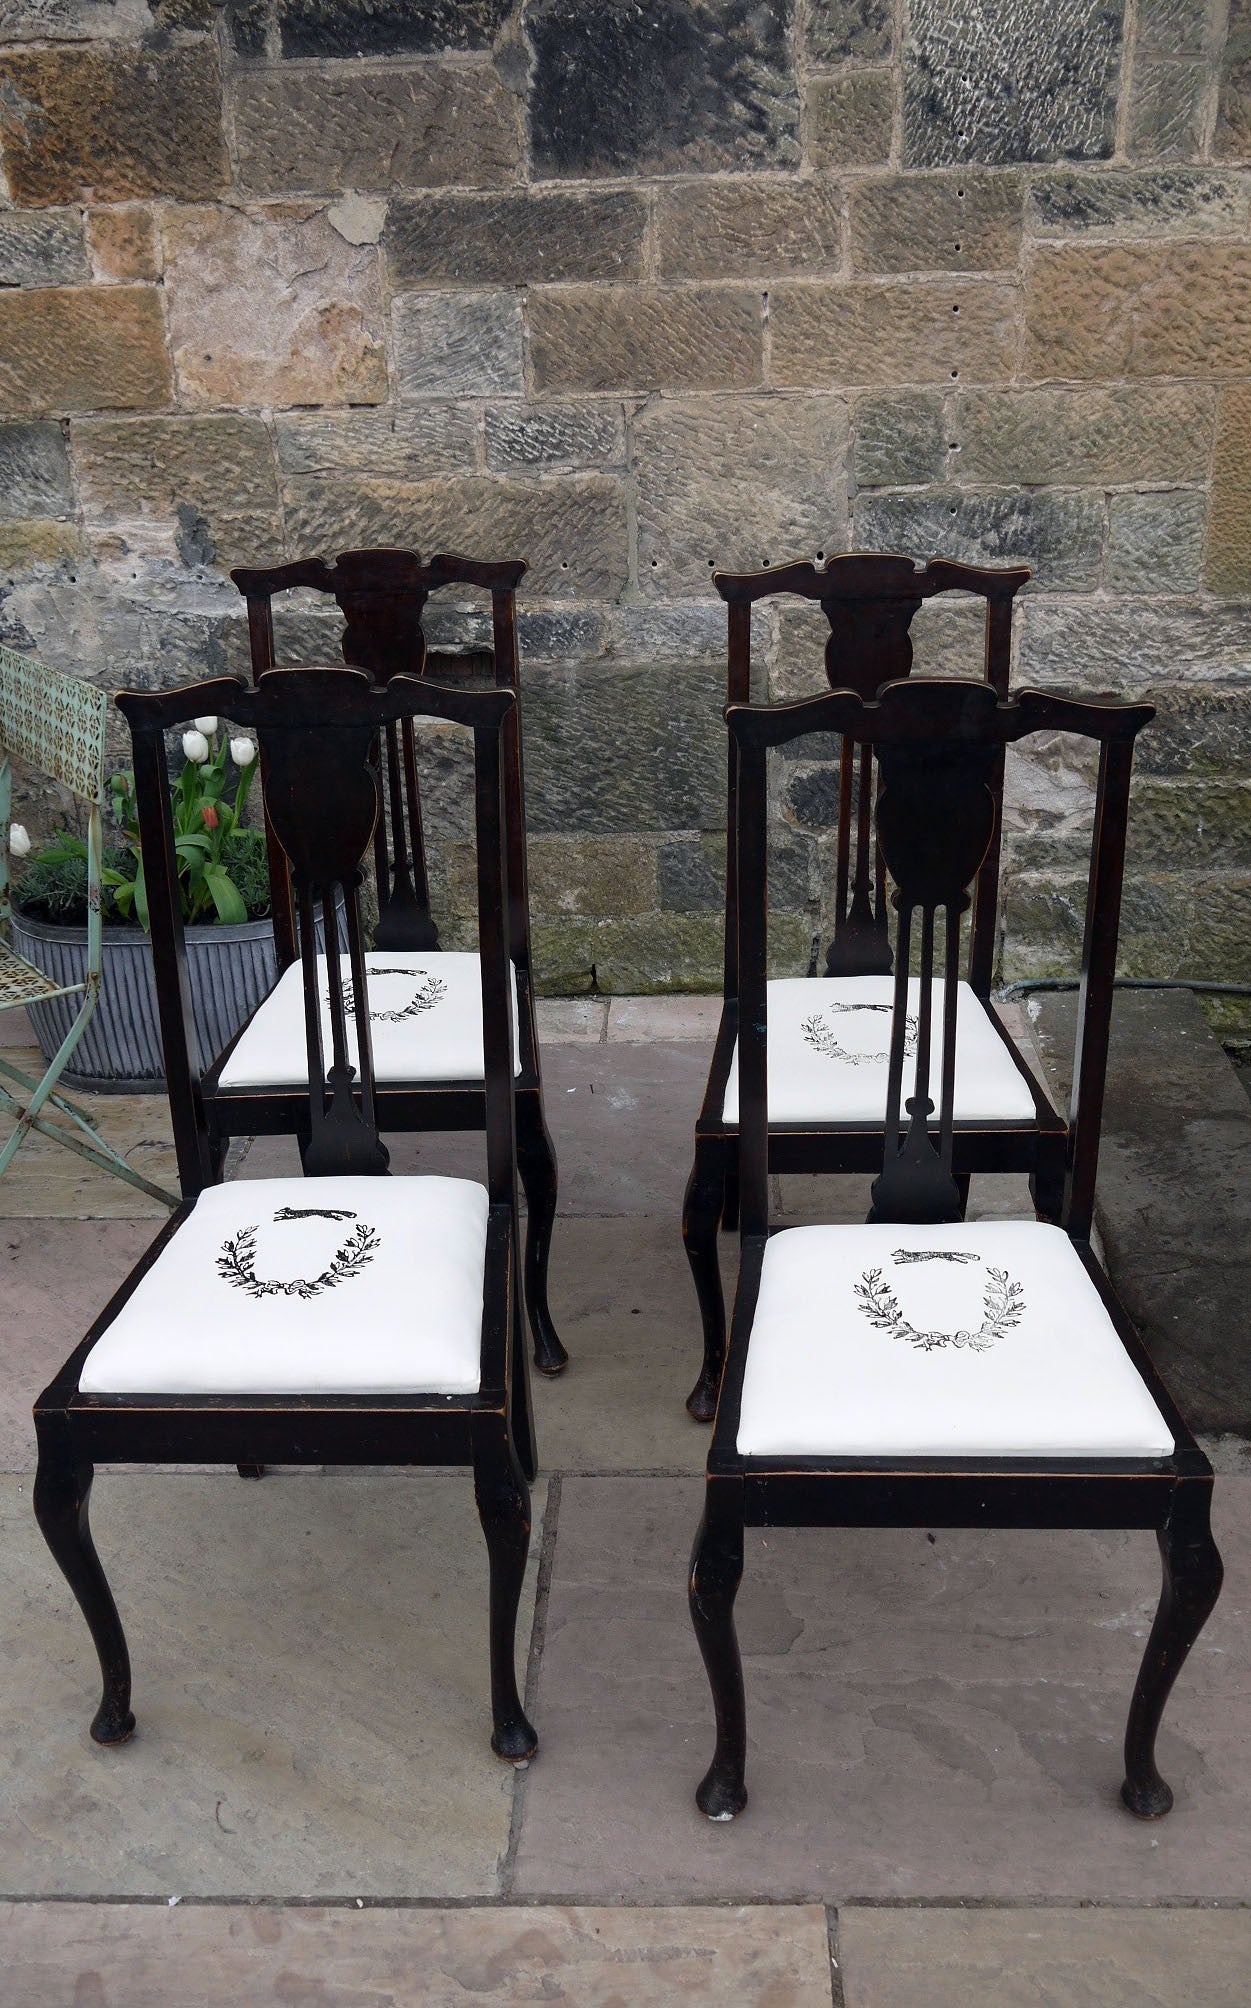 Set of four wooden vintage dining chairs with updated seat pads with a fox and wreath design.